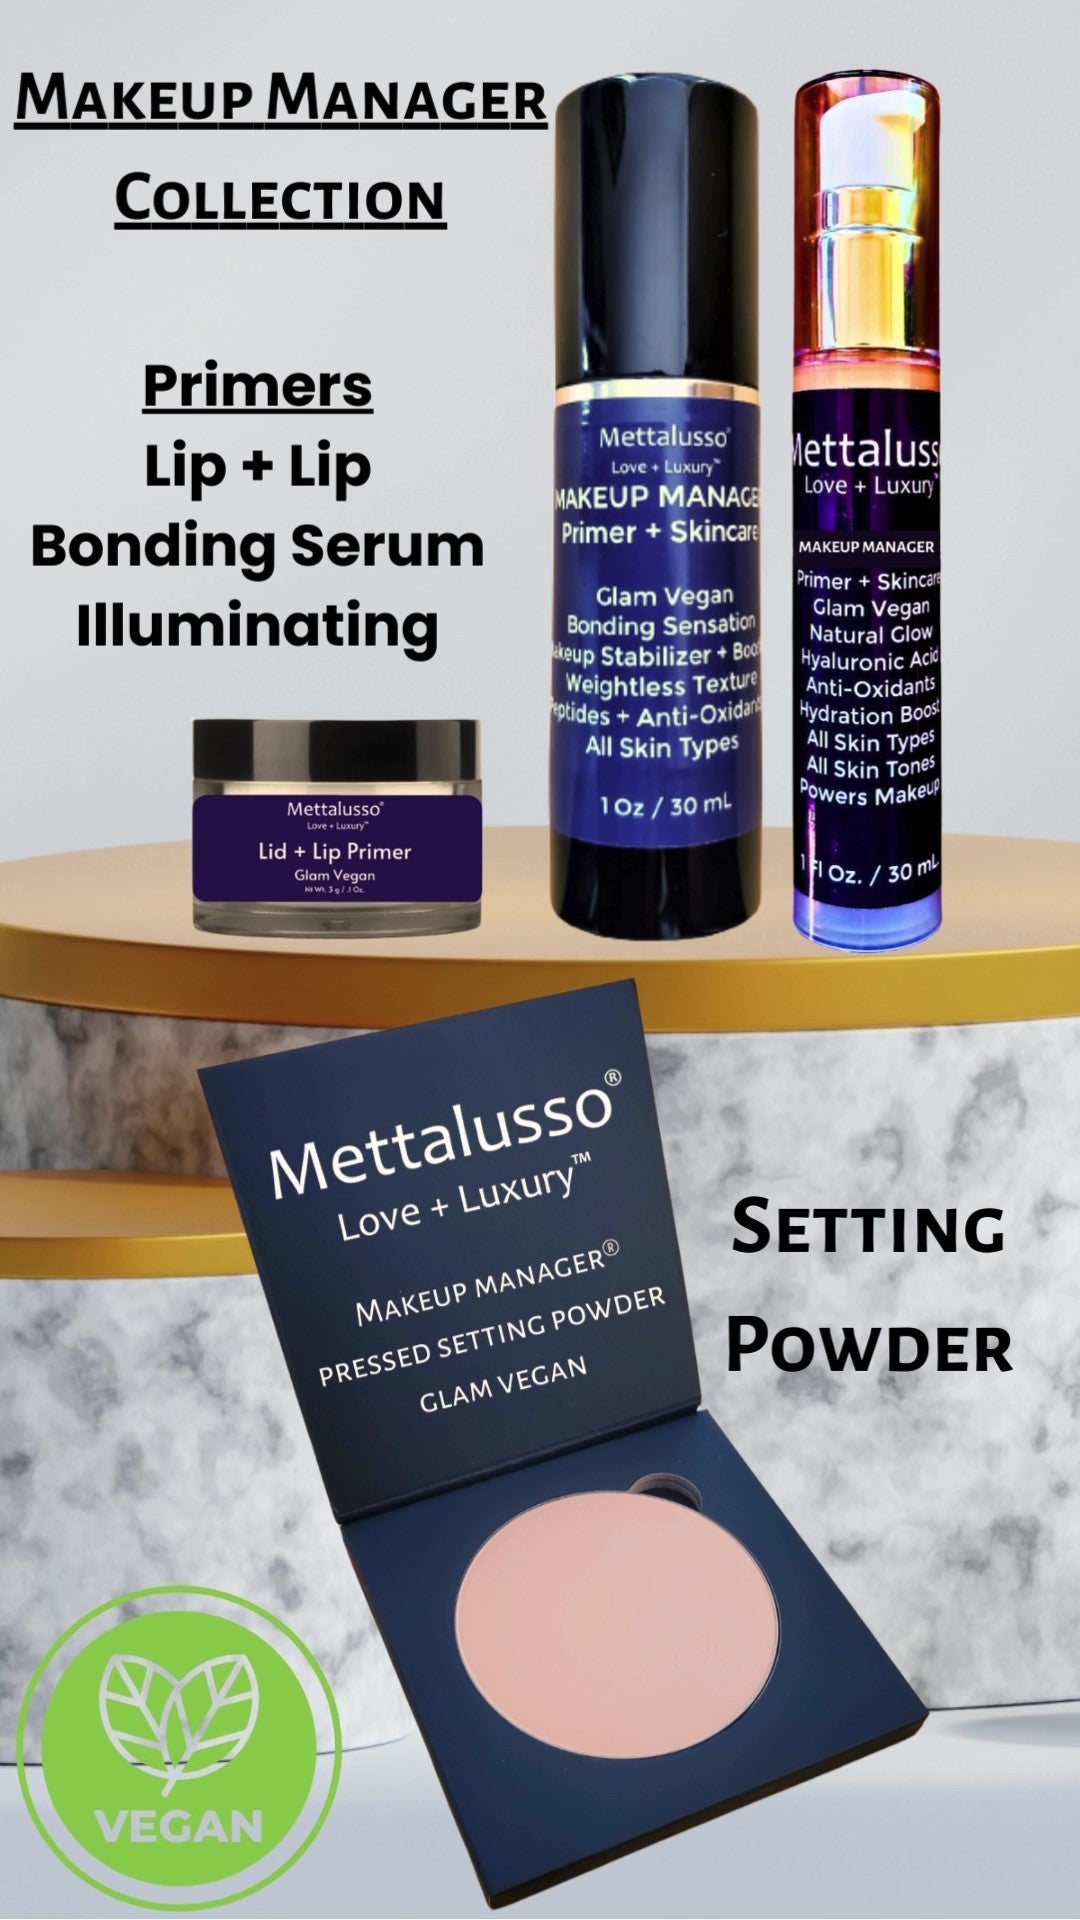 Mettalusso makeup manager vegan primer skincare and setting powder collection now thirty percent off on sale now